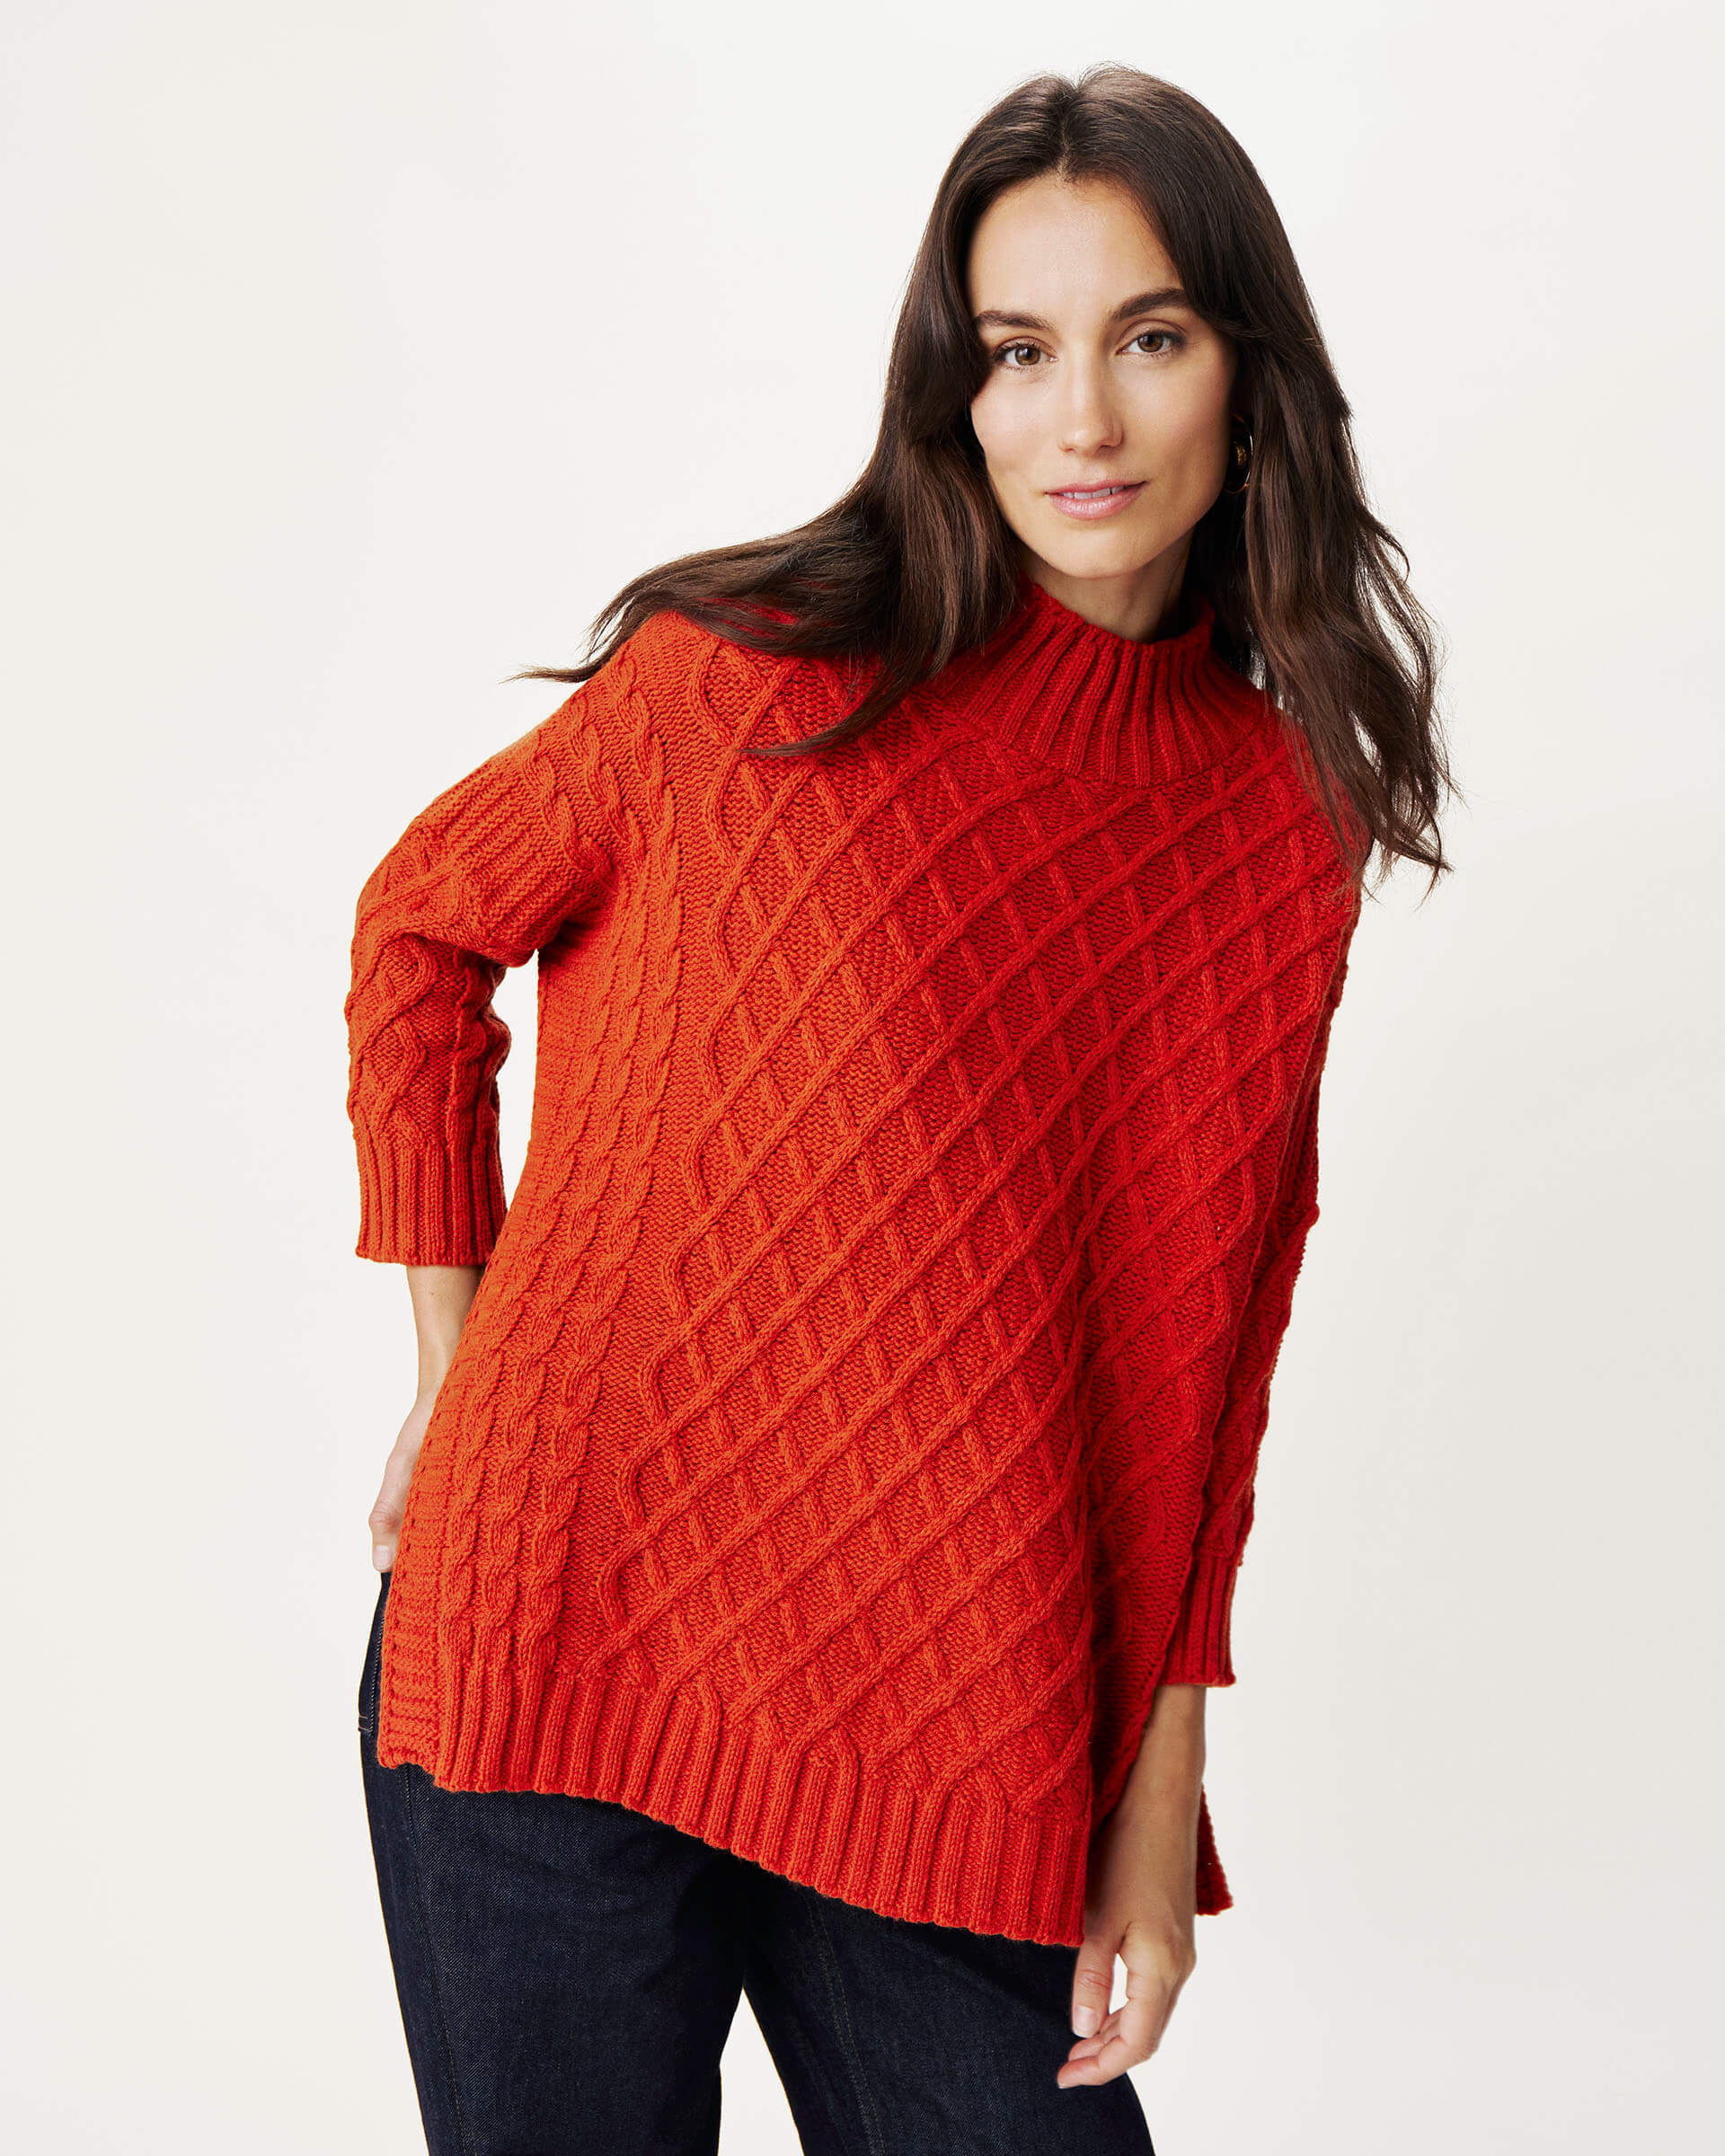 woman wearing Mersea lisbon red sweater against white background